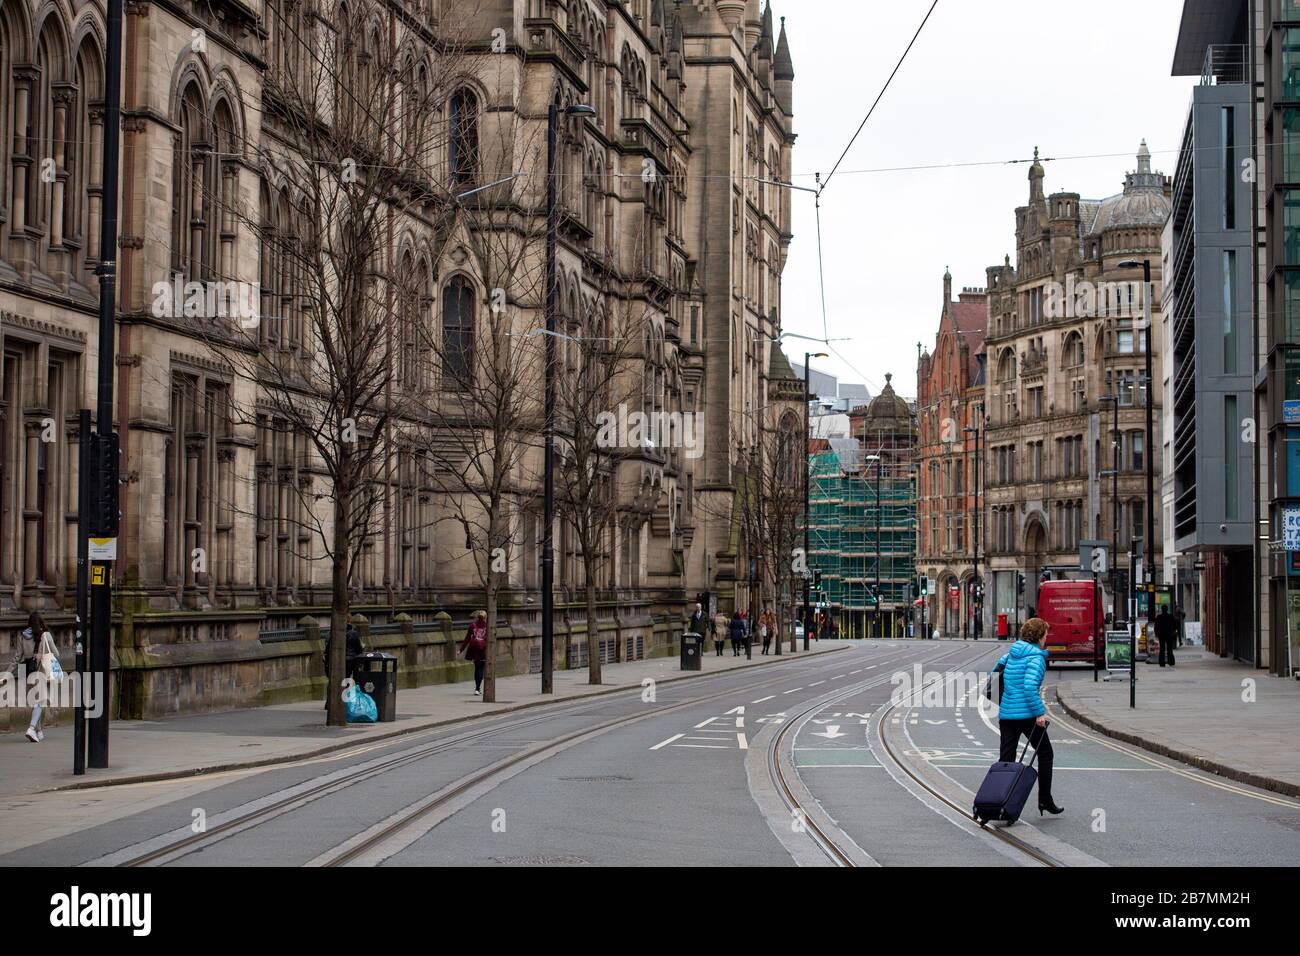 A woman walks across Princess Street in Manchester city centre, the day after Prime Minister Boris Johnson called on people to stay away from pubs, clubs and theatres, work from home if possible and avoid all non-essential contacts and travel in order to reduce the impact of the coronavirus pandemic. Stock Photo